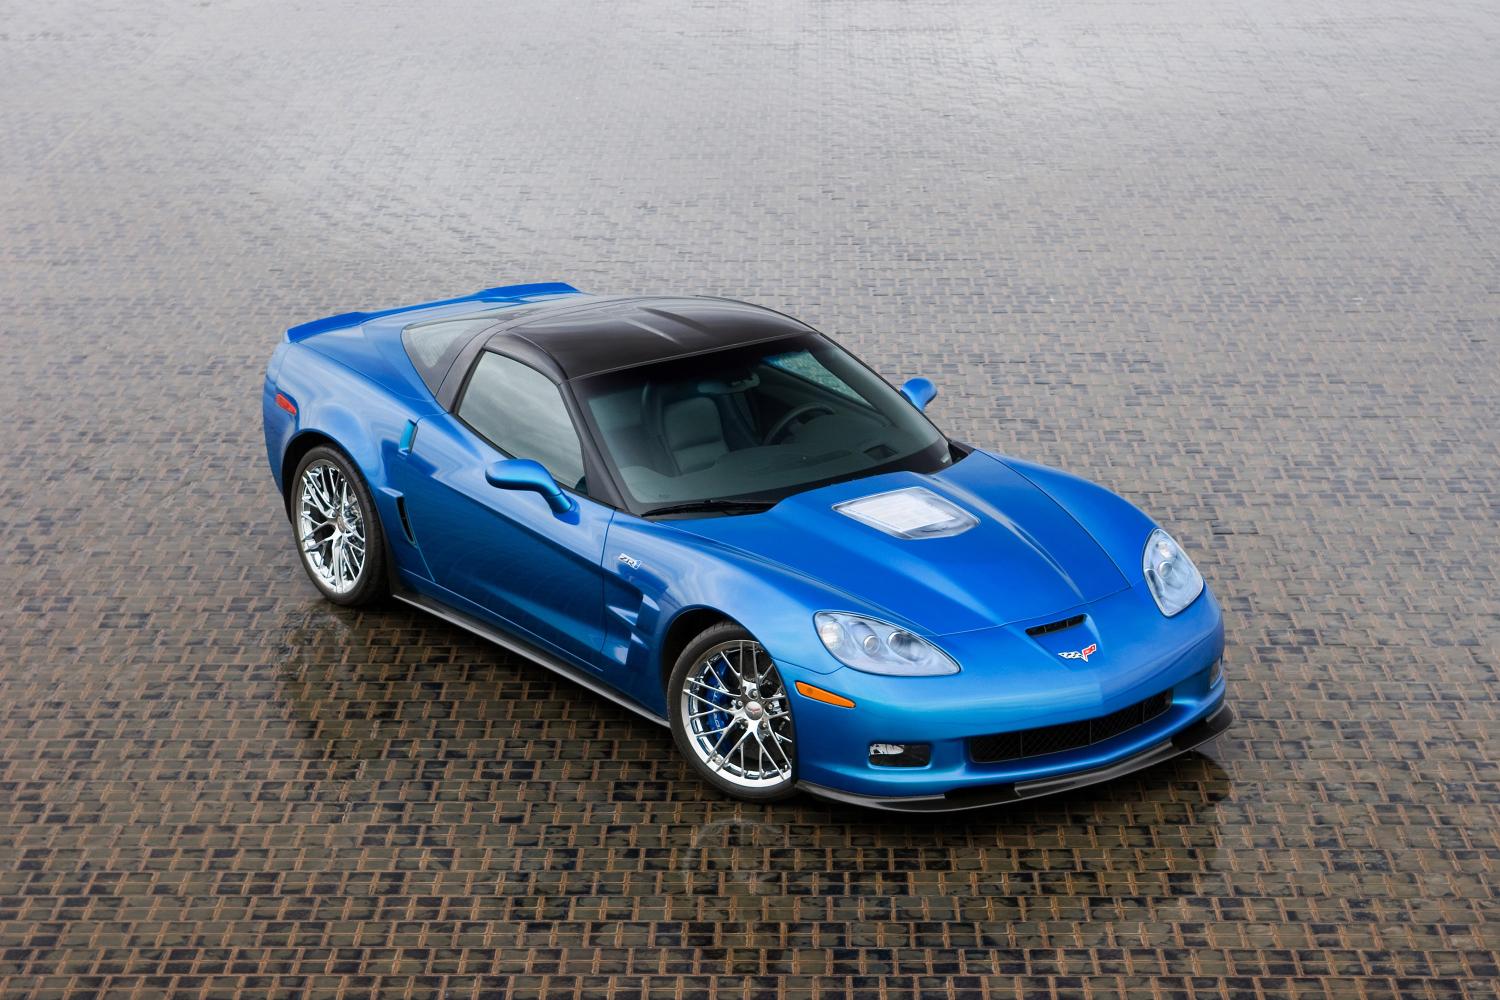 The 2009 ZR1 “Blue Devil” was the first 2009 ZR1 produced. It was one of two cars on loan from GM that were damaged